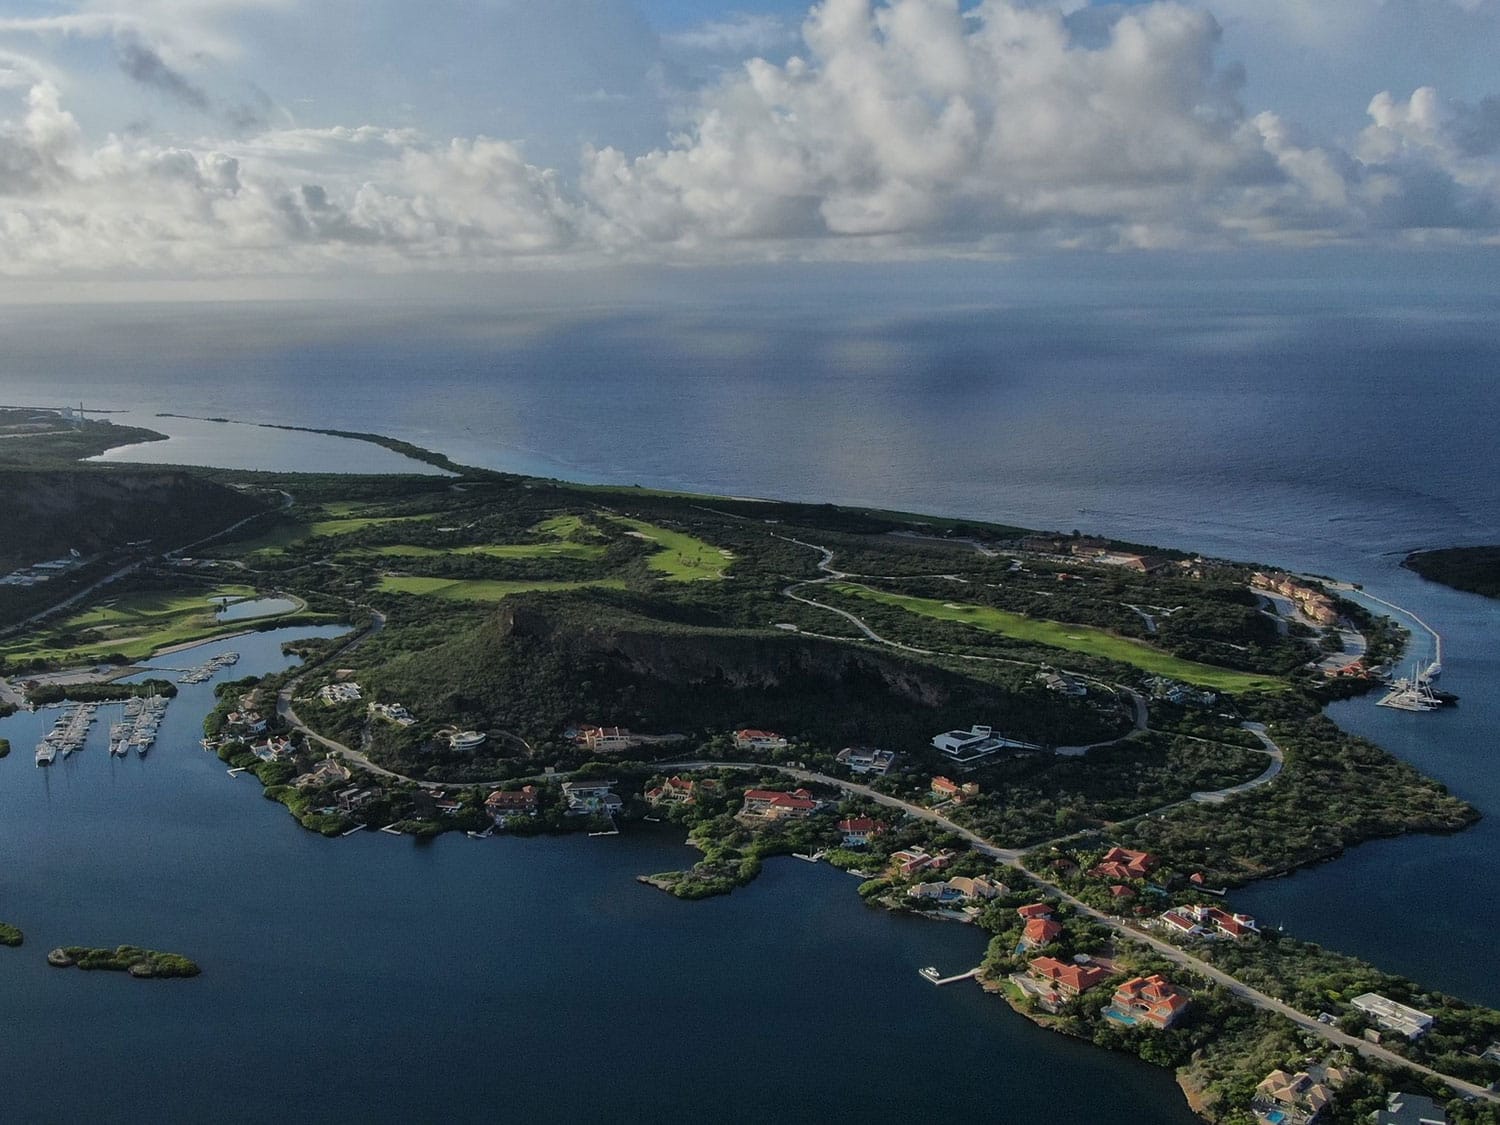 An aerial view of the Old Quarry Golf Course on the Dutch Caribbean island of Curaçao.